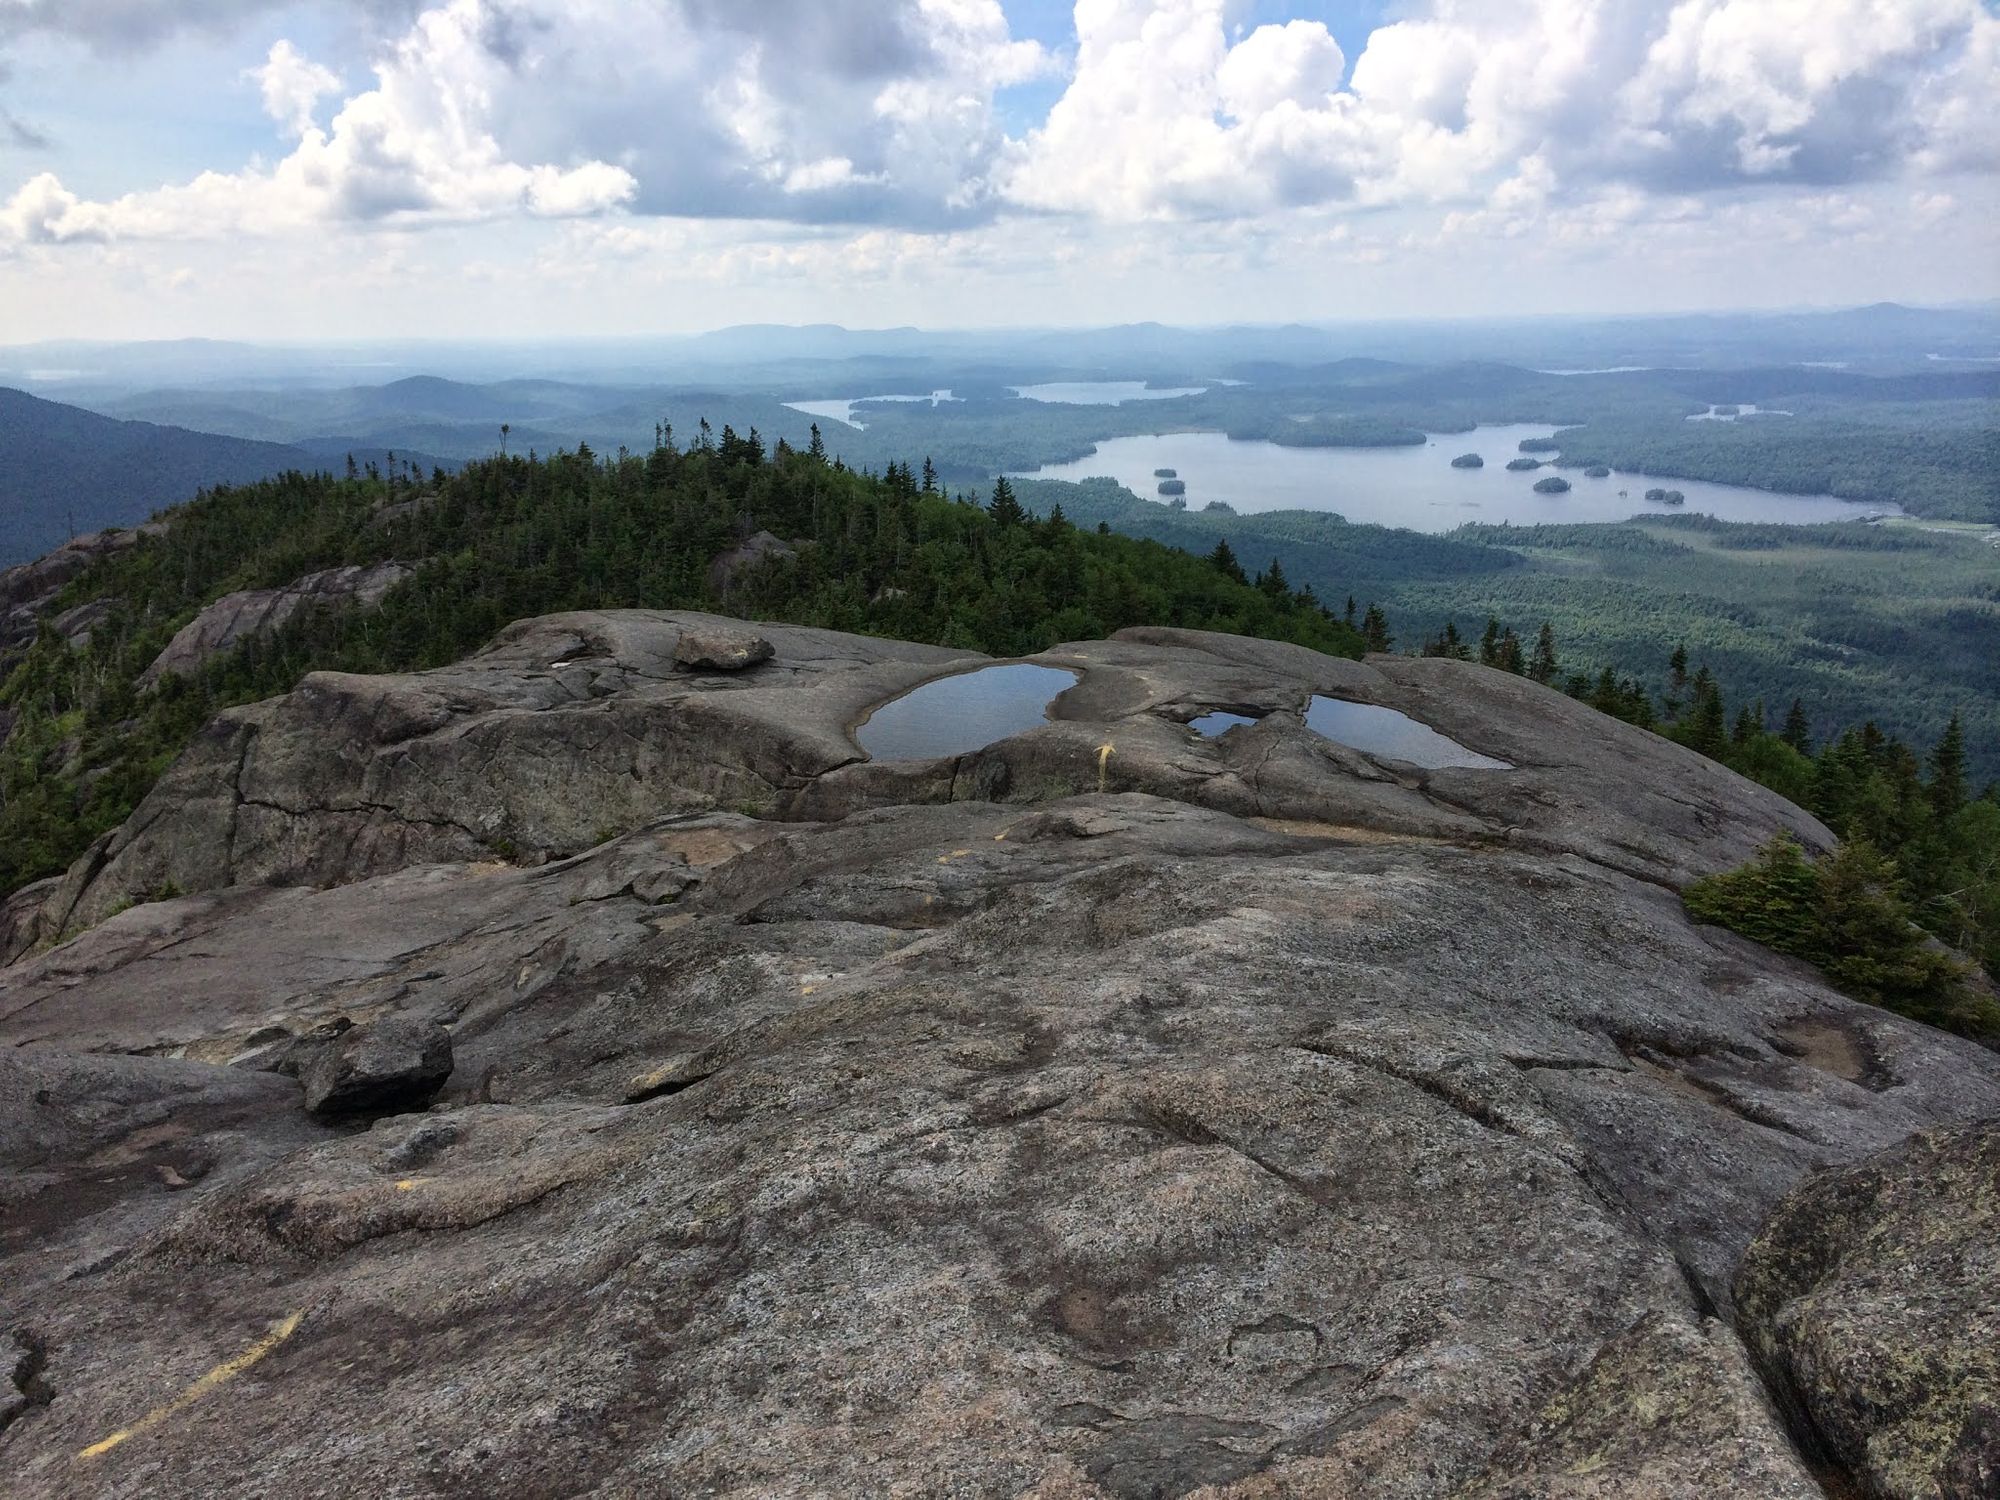 A stunning view from the Ampersand mountain trail hike of the forests and lakes below